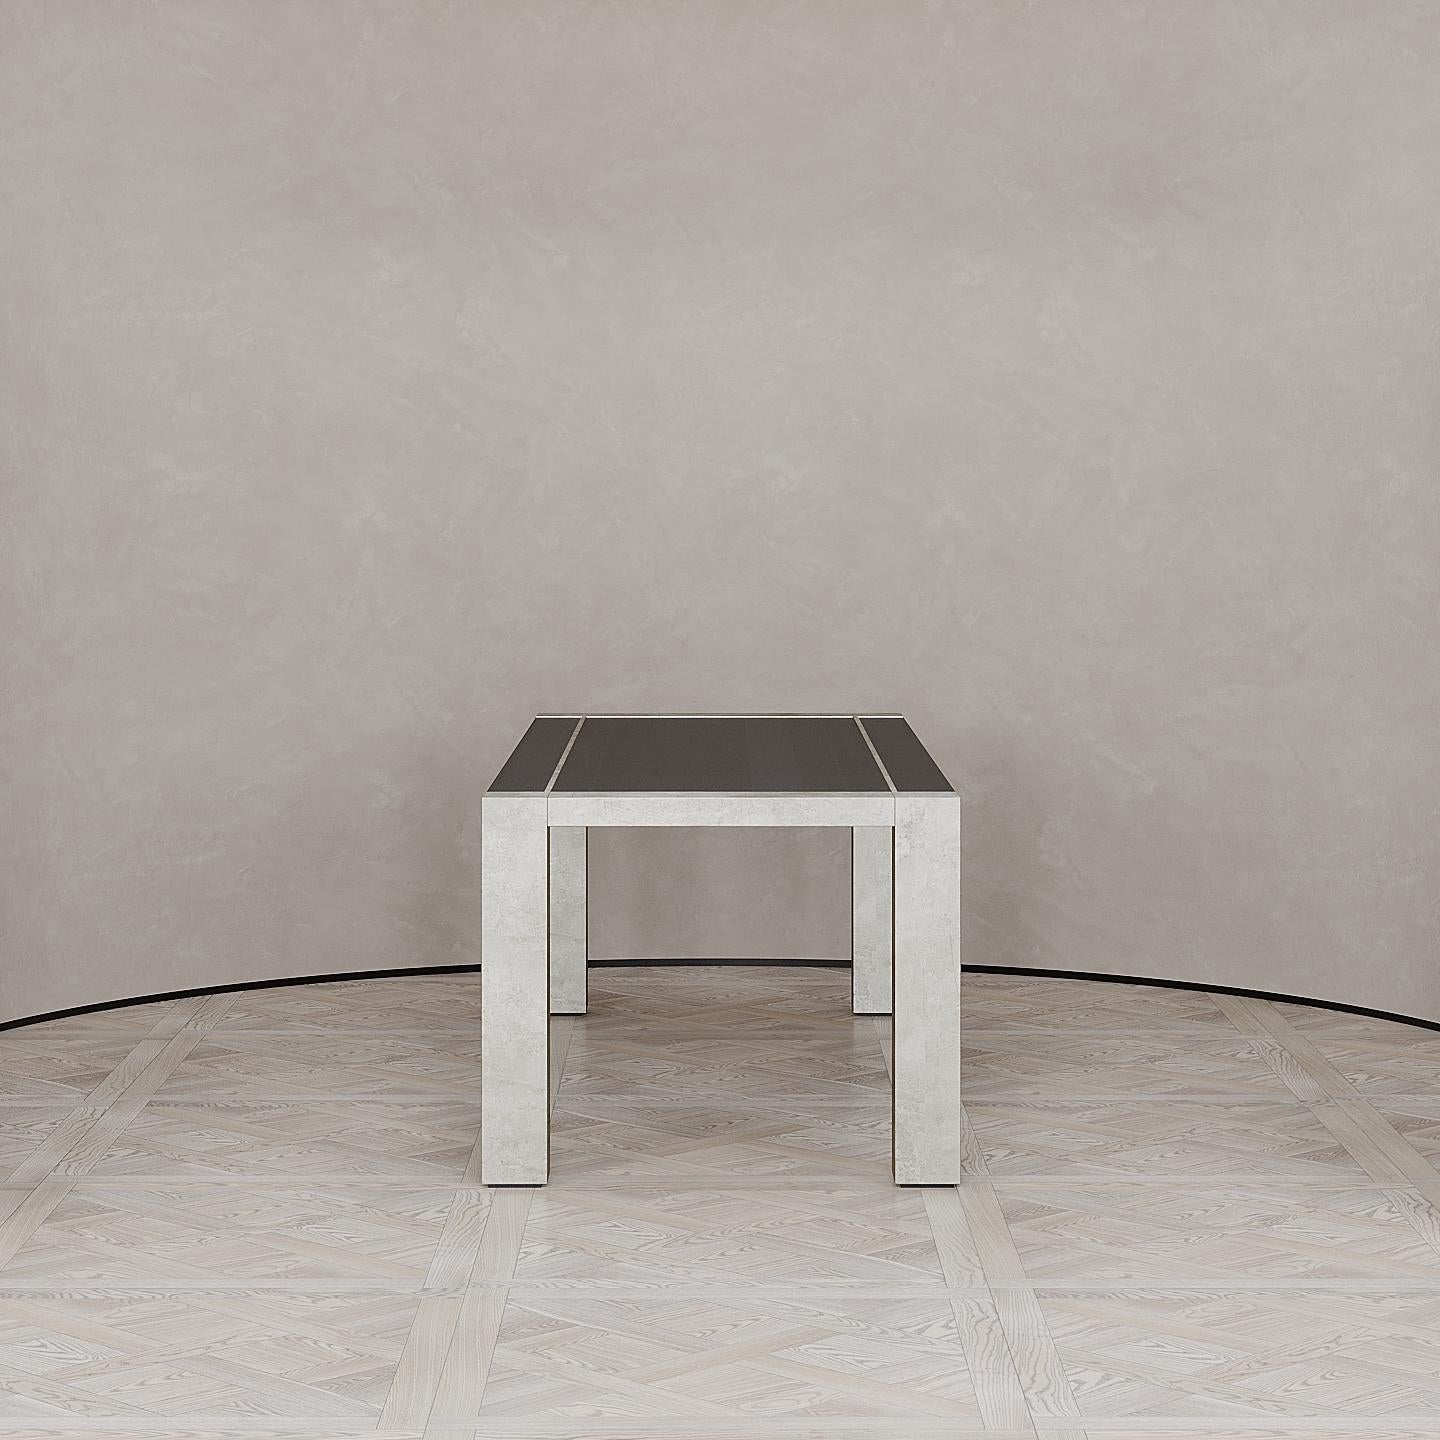 Minimalist Lunares Rectangular Dining Table of Oak and Pewter, Made in Italy For Sale